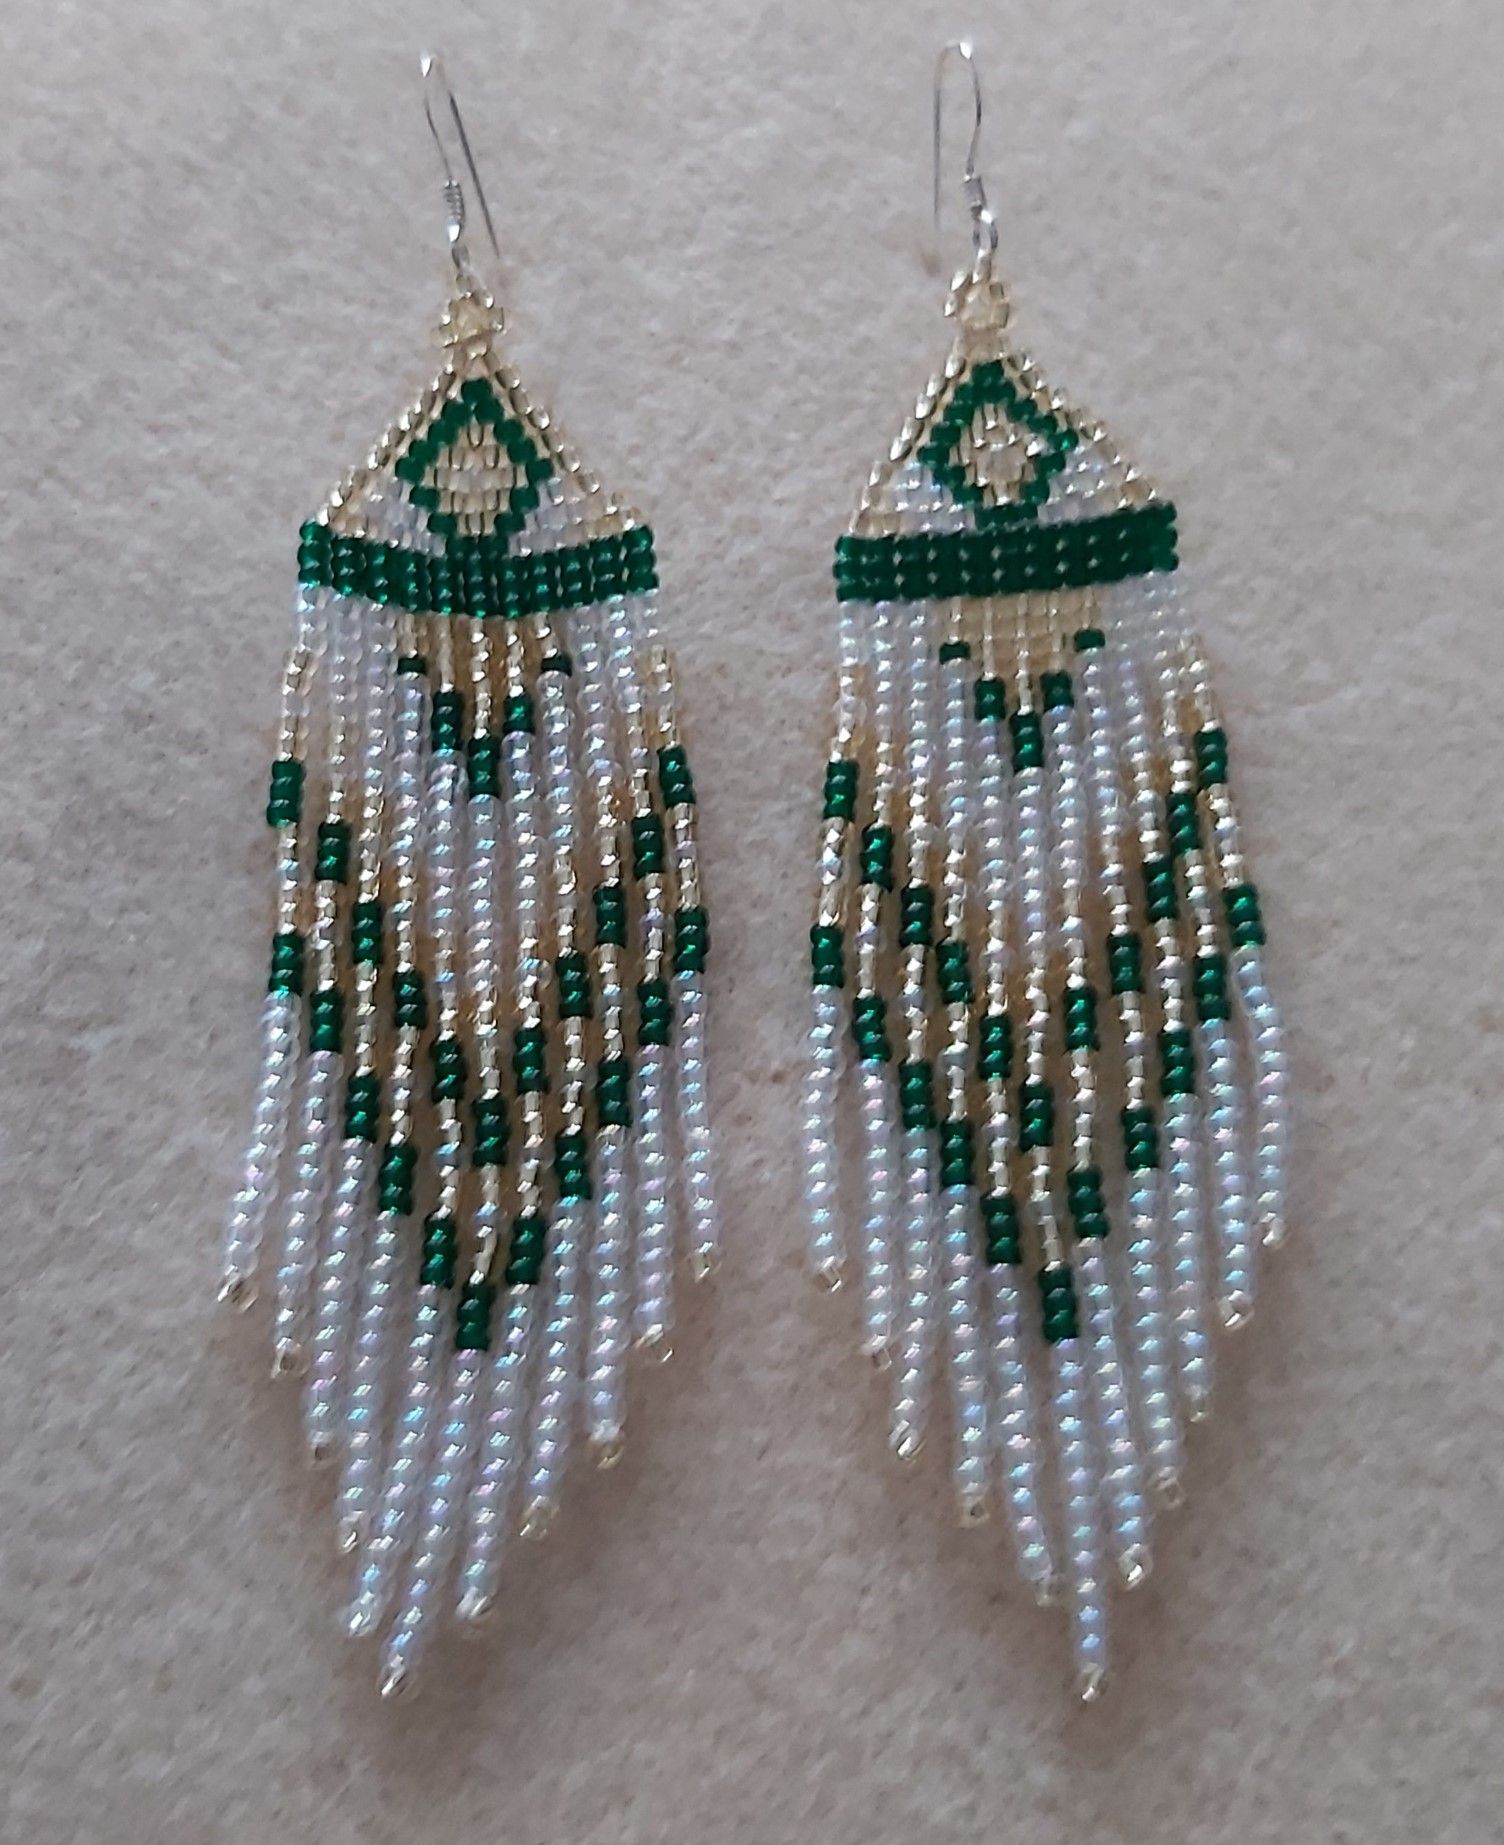 Native American Design Seed Bead Earrings with 925 Sterling Silver hooks